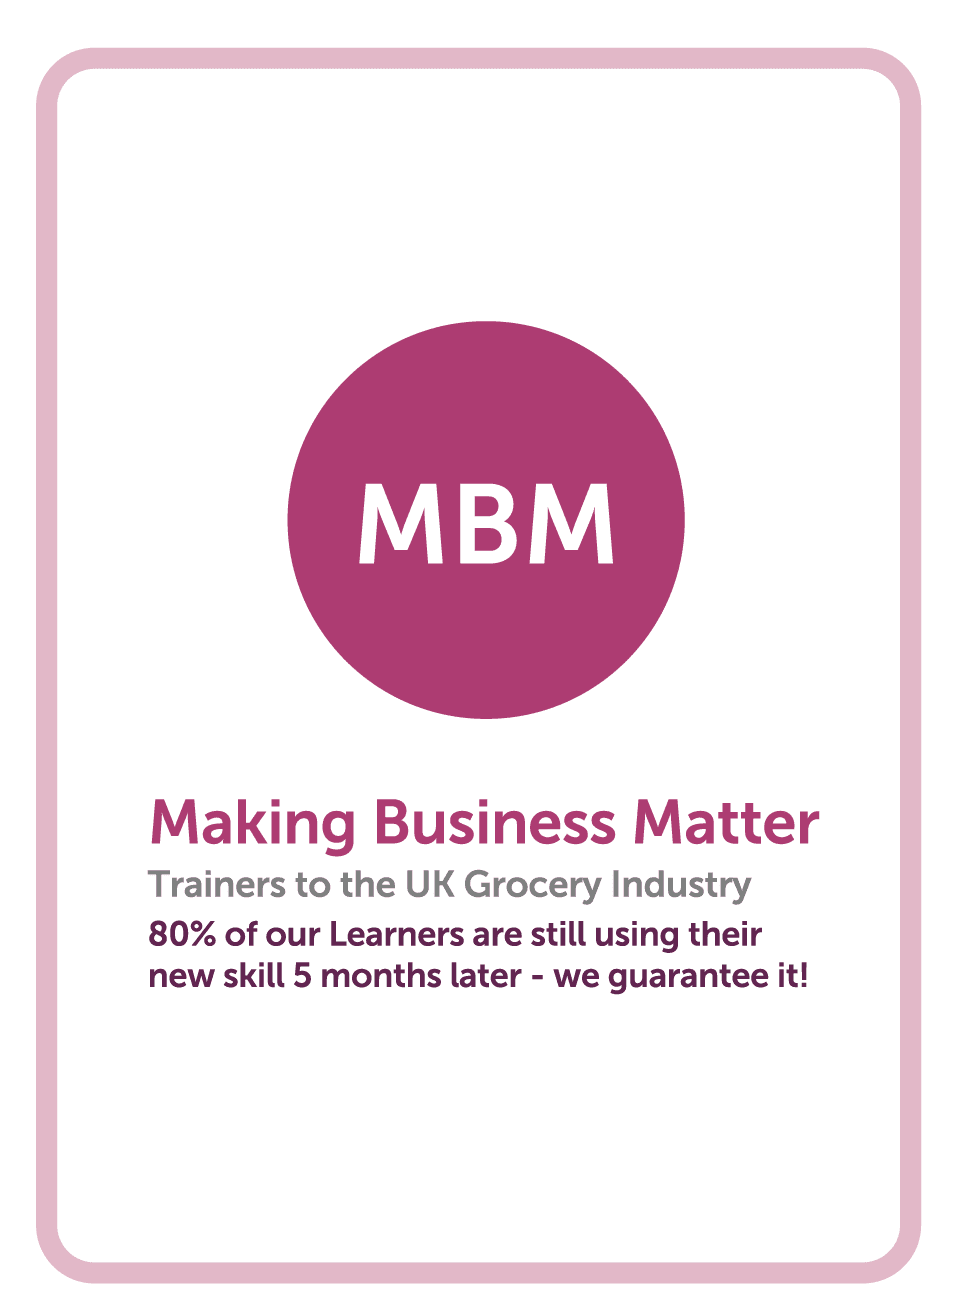 Coaching card with MBM logo in centre